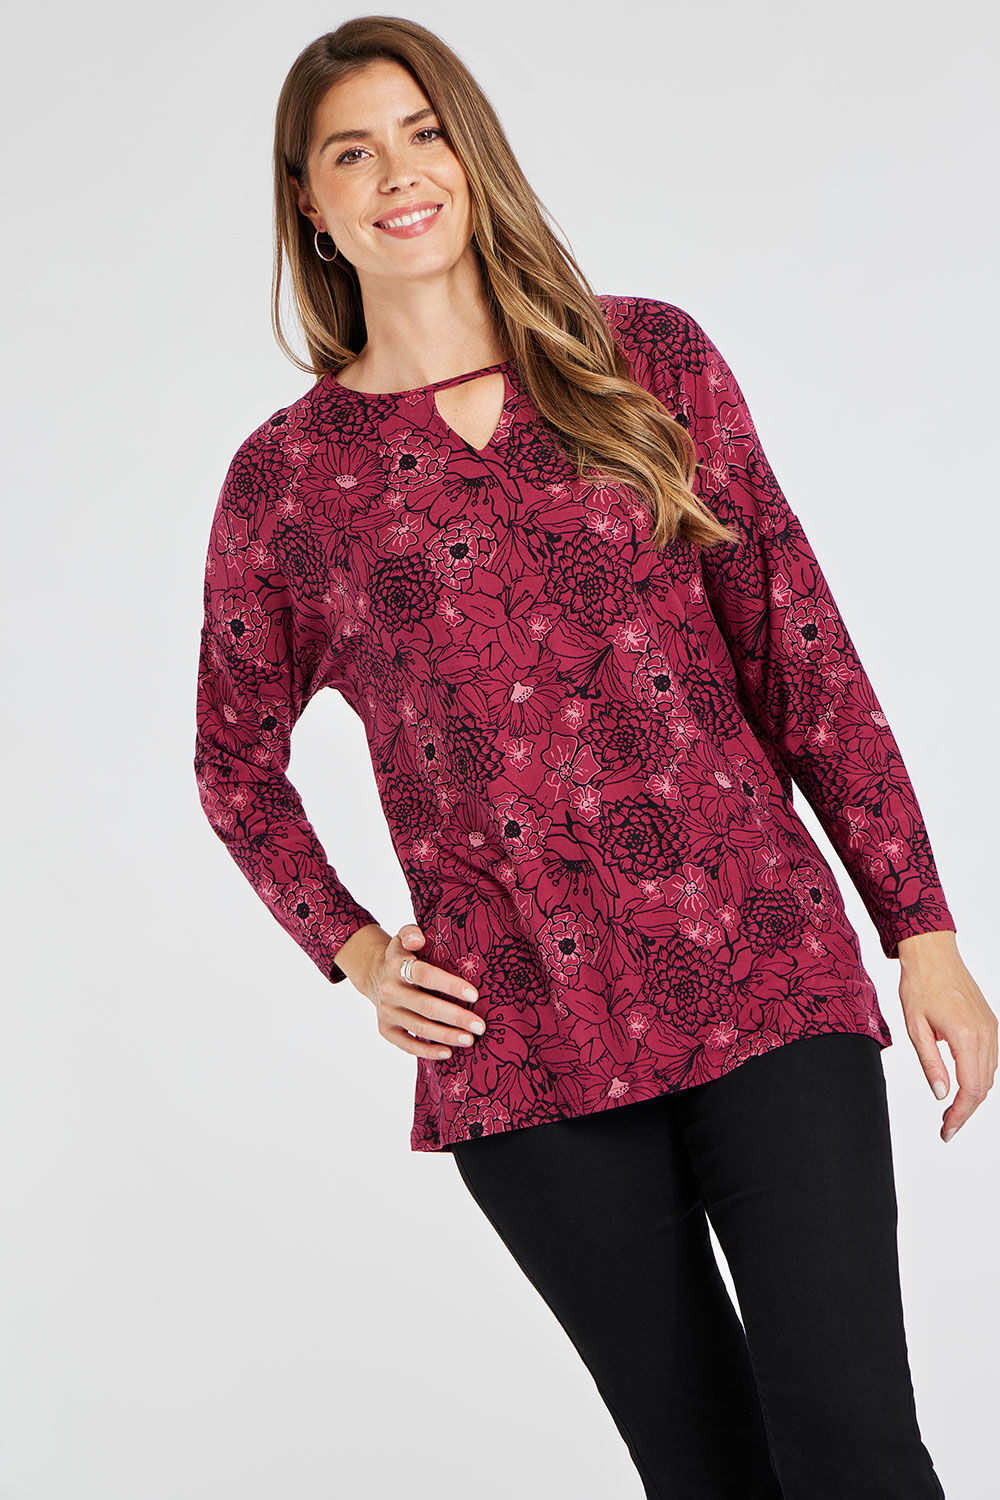 Bonmarche Burgundy Long Sleeve Floral Print Soft Touch Tunic, Size: 10